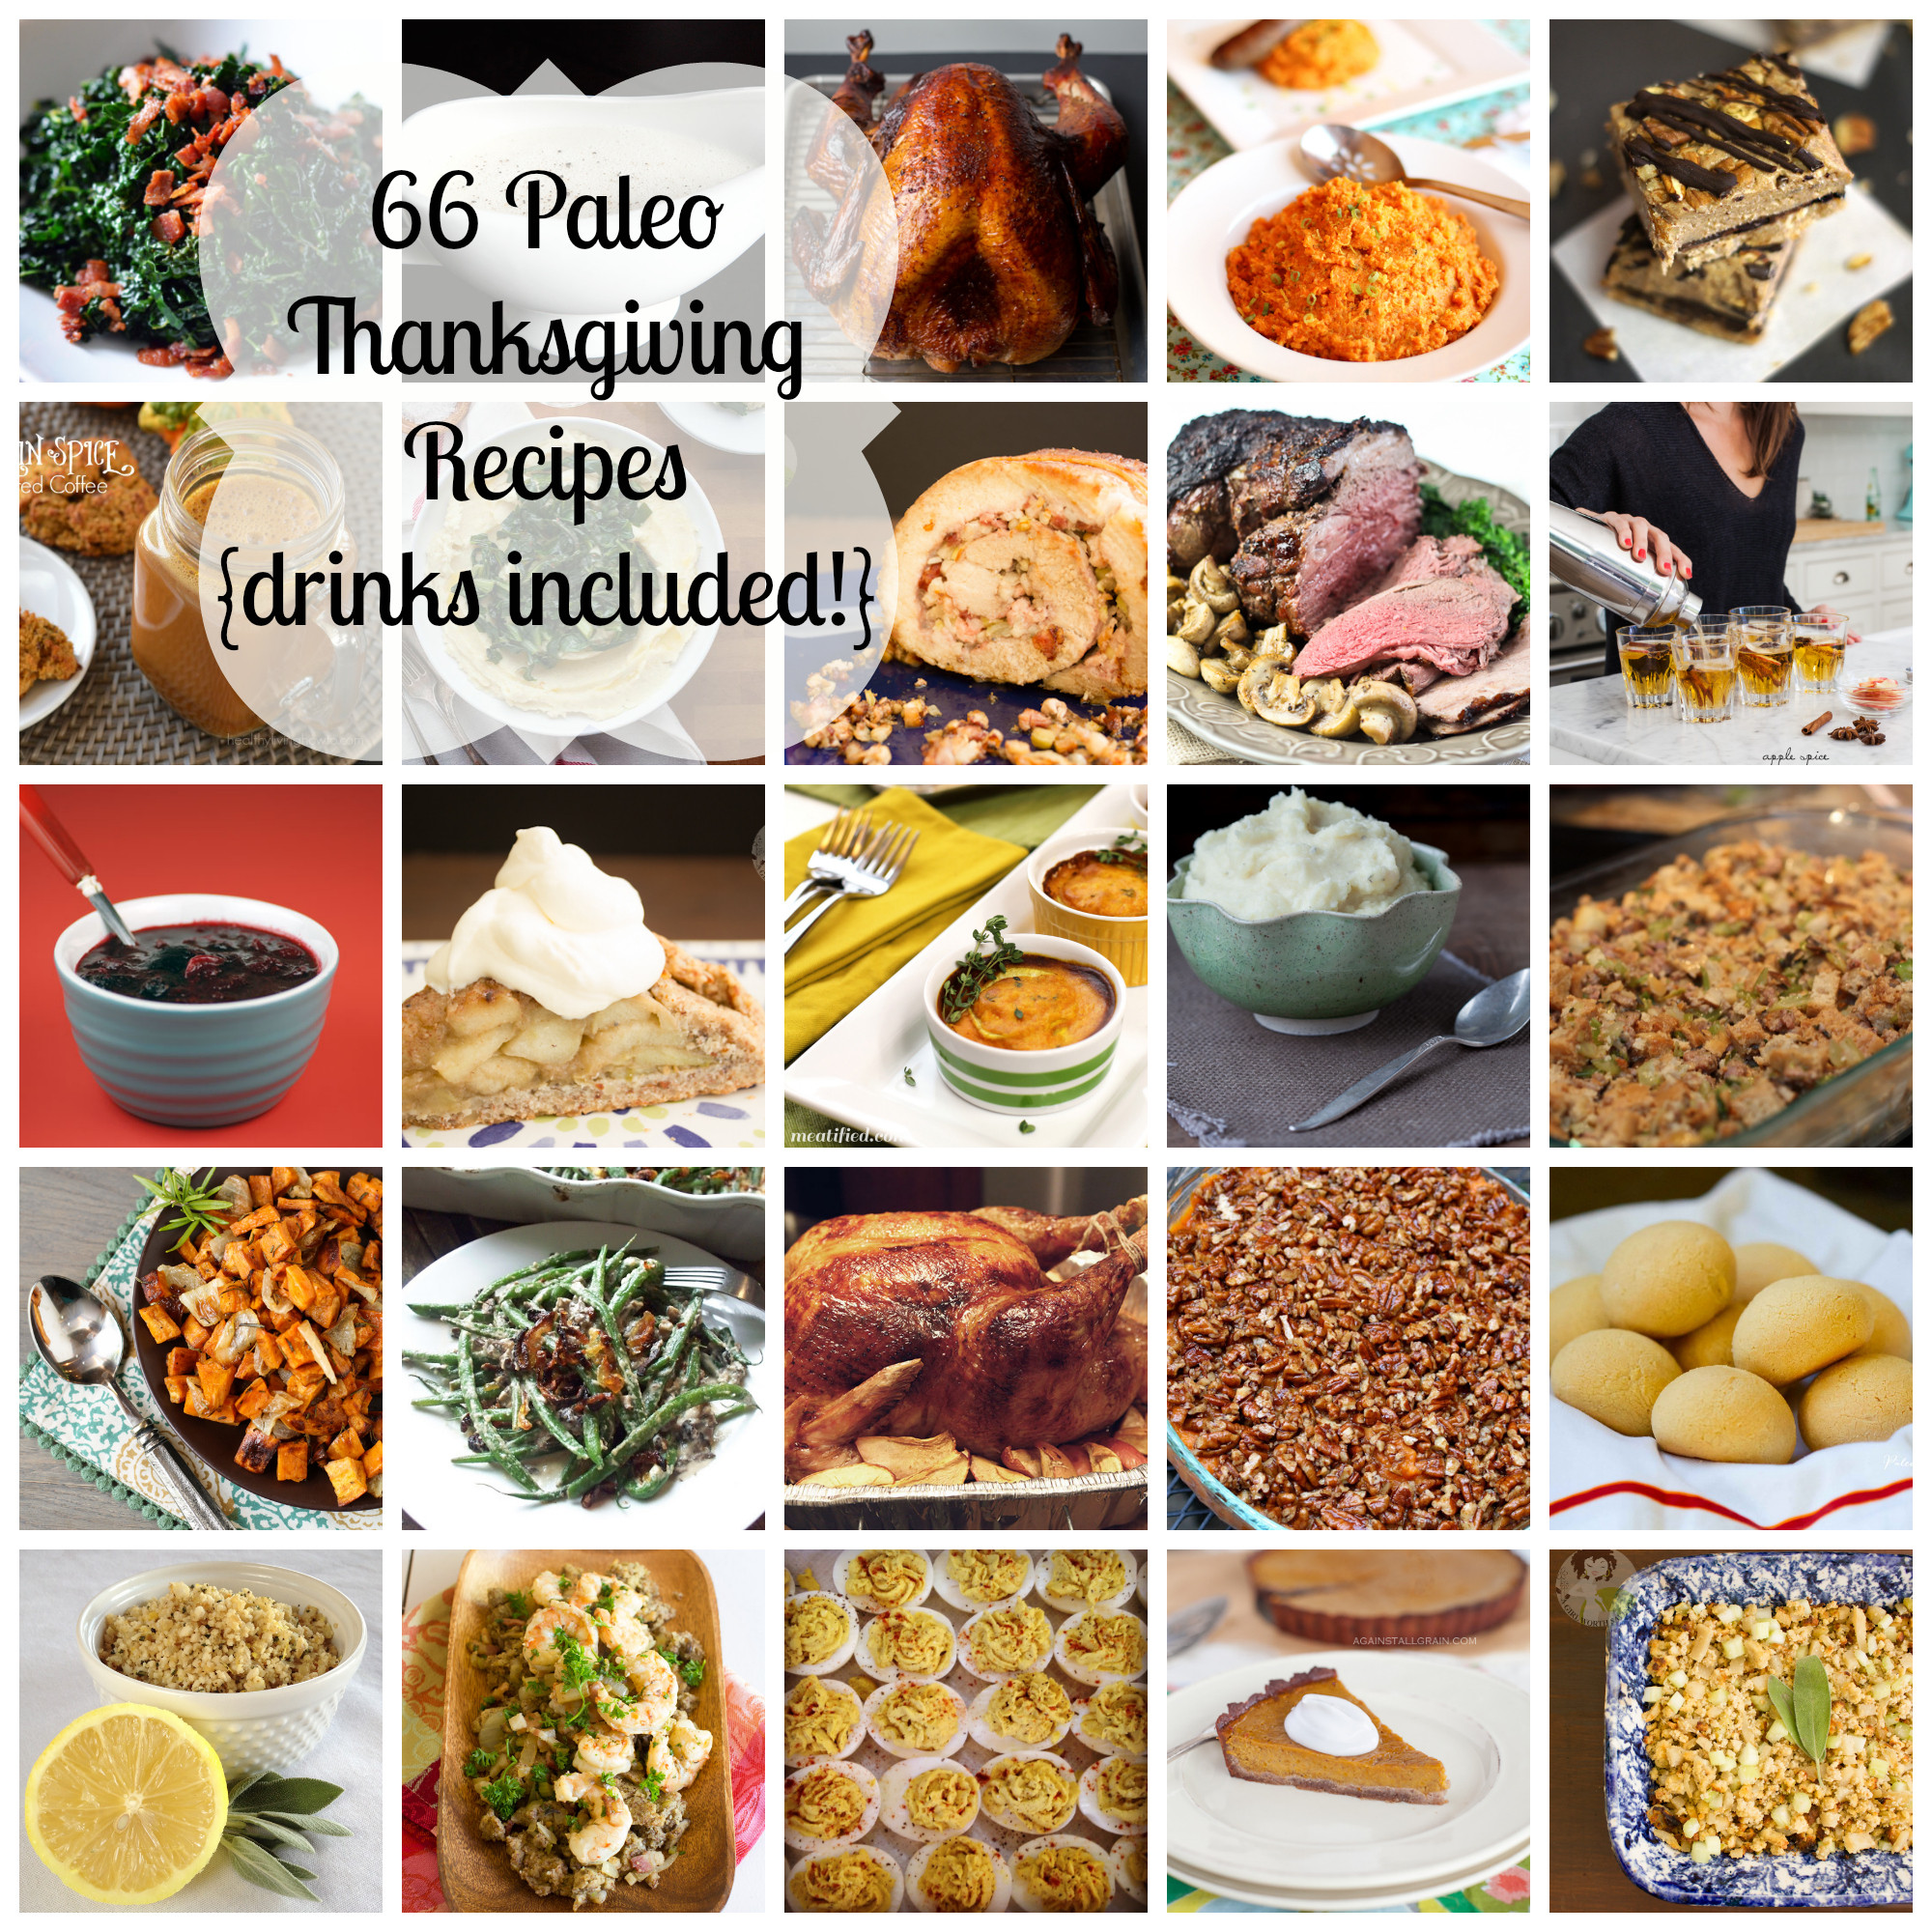 Paleo Thanksgiving Appetizers
 66 Paleo Thanksgiving Recipes including drinks  meatified